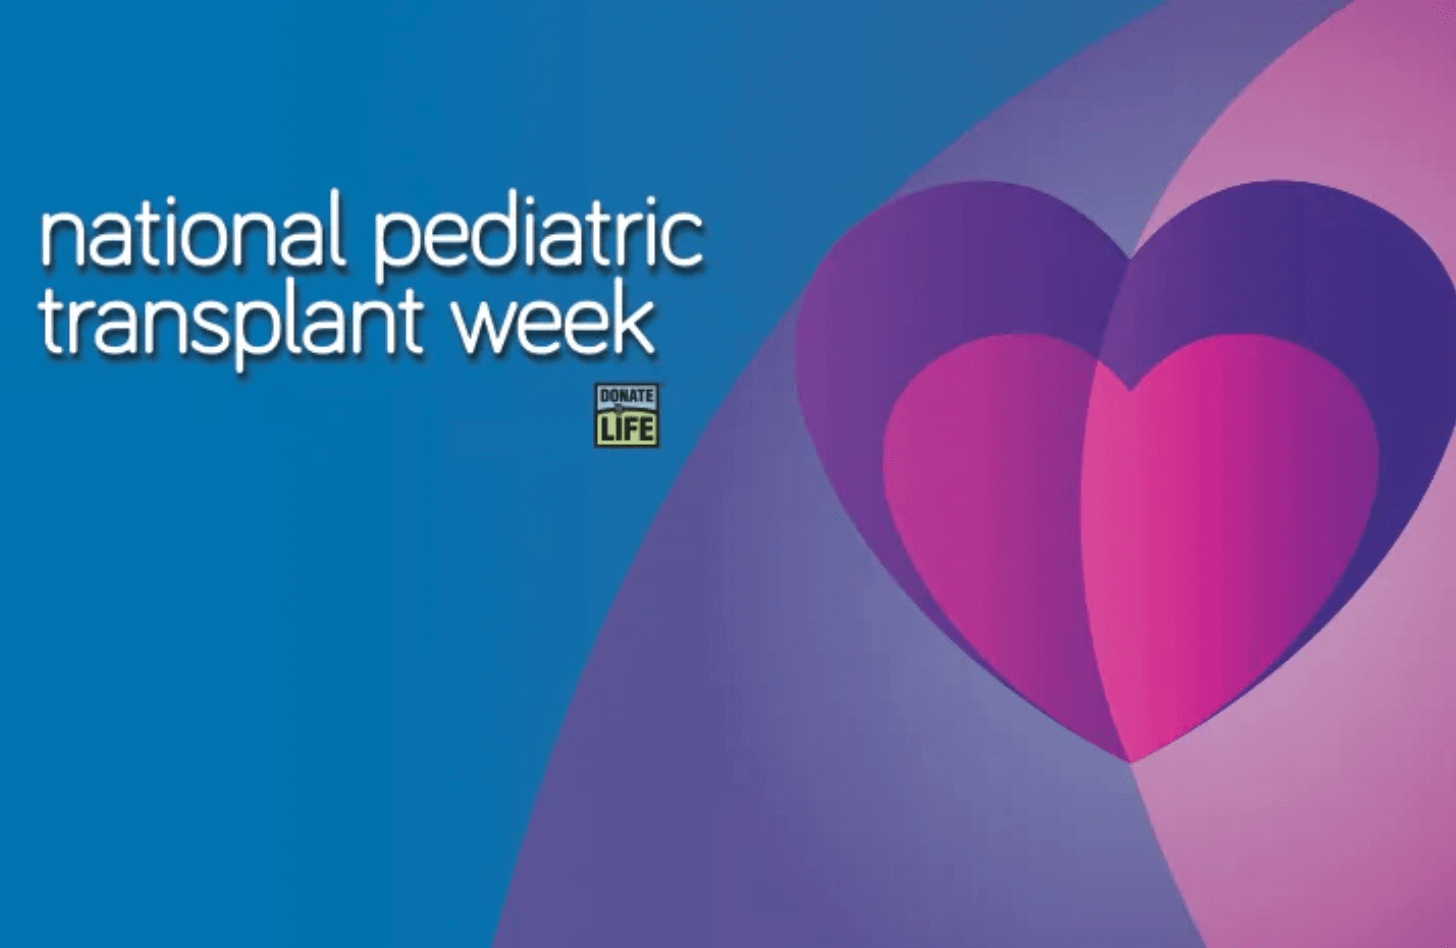 National Pediatric Transplant Week - Pink and purple hearts on a blue background